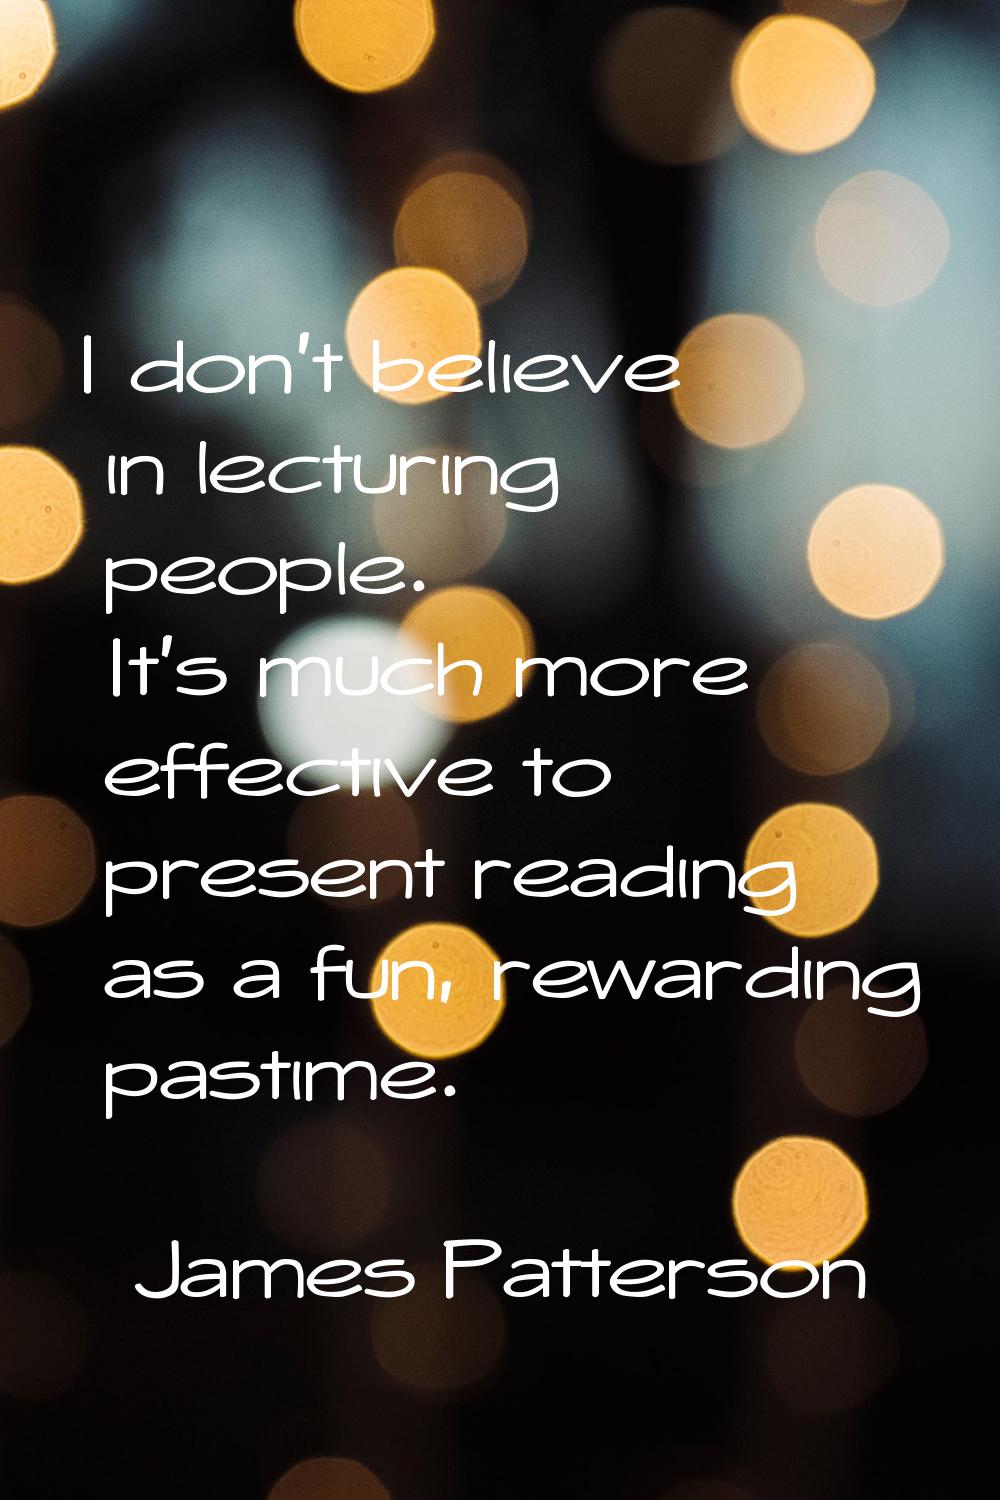 I don't believe in lecturing people. It's much more effective to present reading as a fun, rewardin